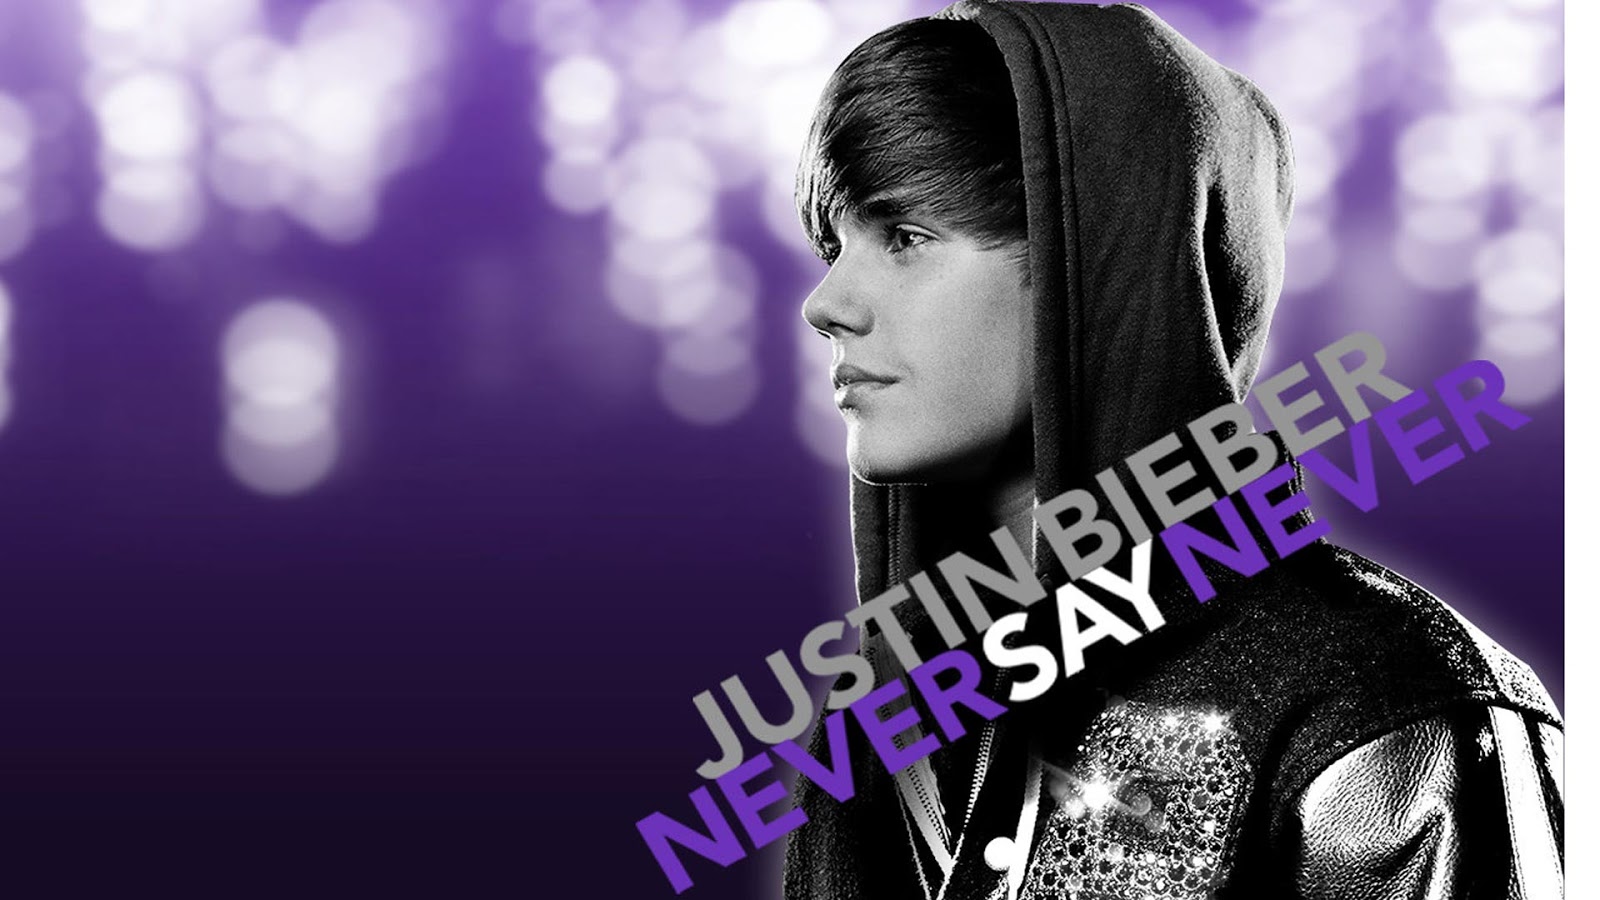 Justin Here Is Bieber HD Wallpaper Desktop Background And Photo